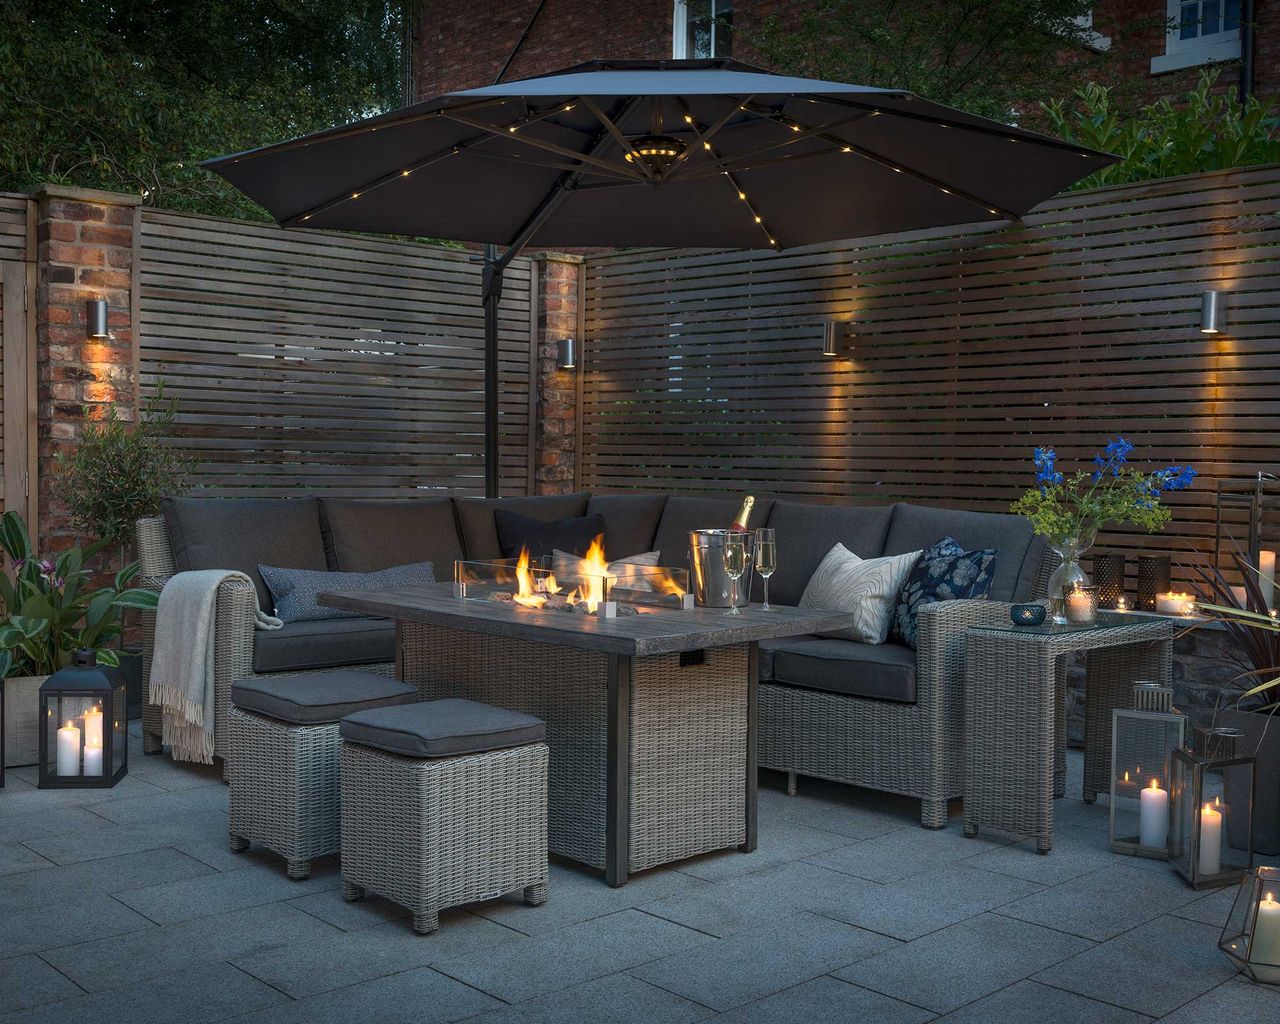 Patio heater ideas: 11 luxe looks to keep your outdoor living space ...